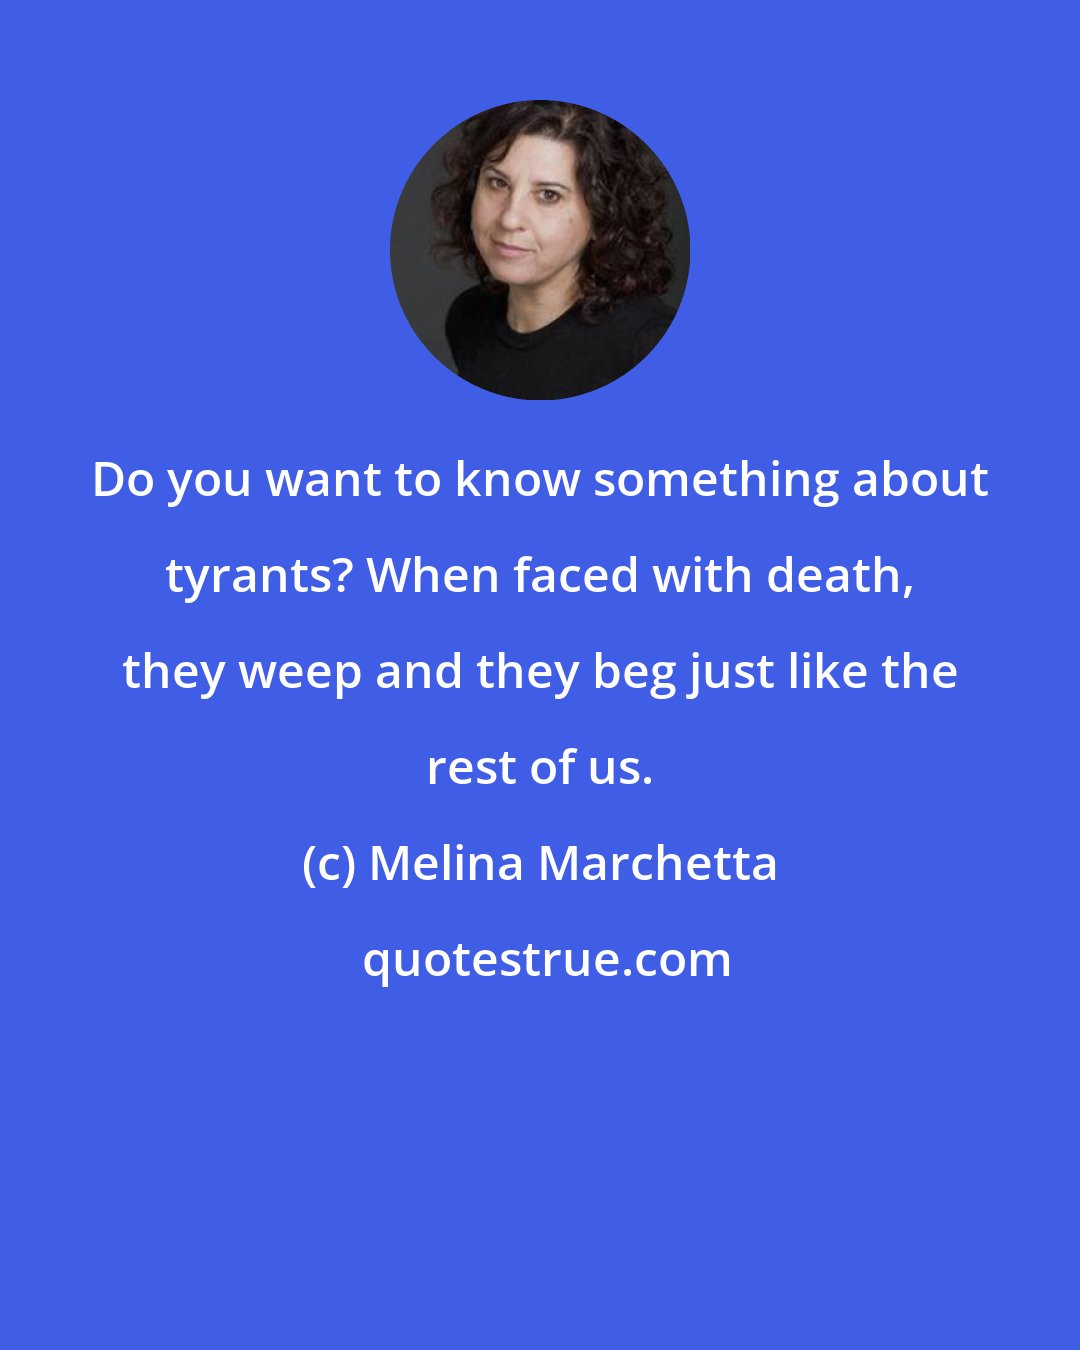 Melina Marchetta: Do you want to know something about tyrants? When faced with death, they weep and they beg just like the rest of us.